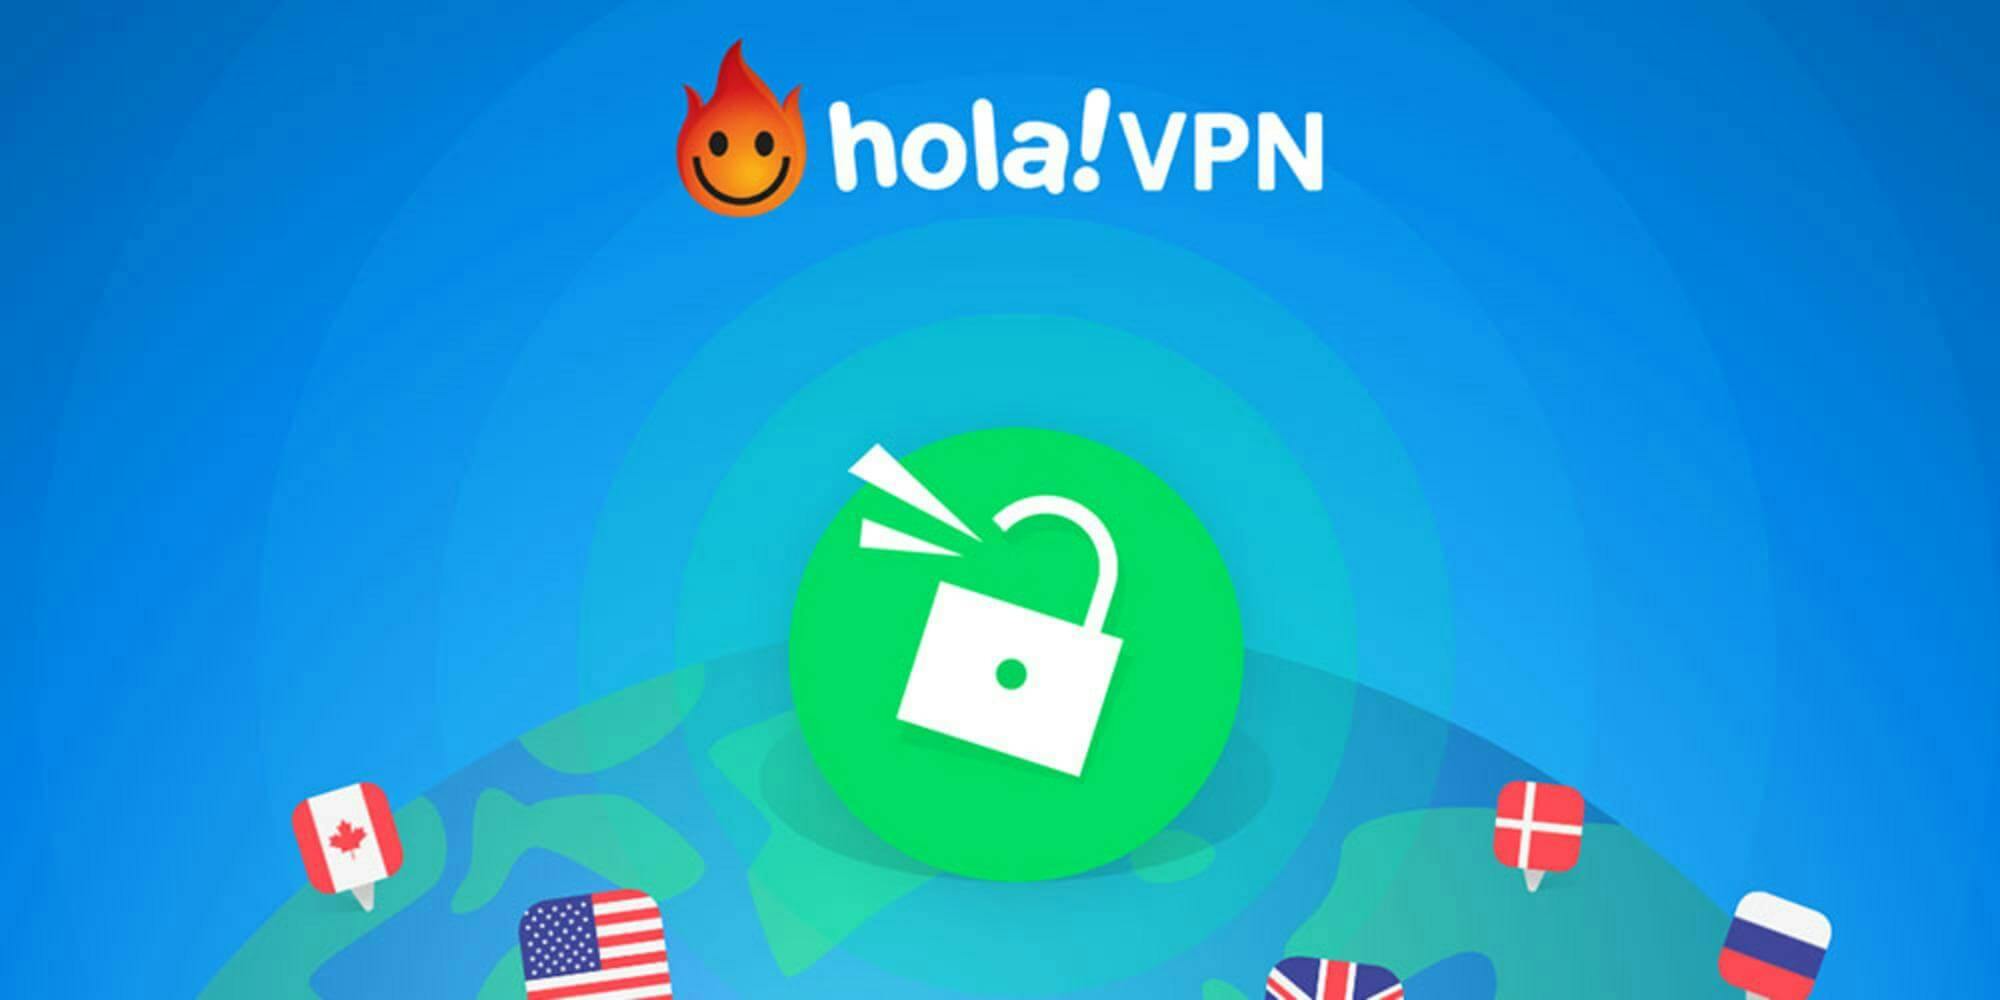 Get faster, safer unlimited access with this top-rated VPN